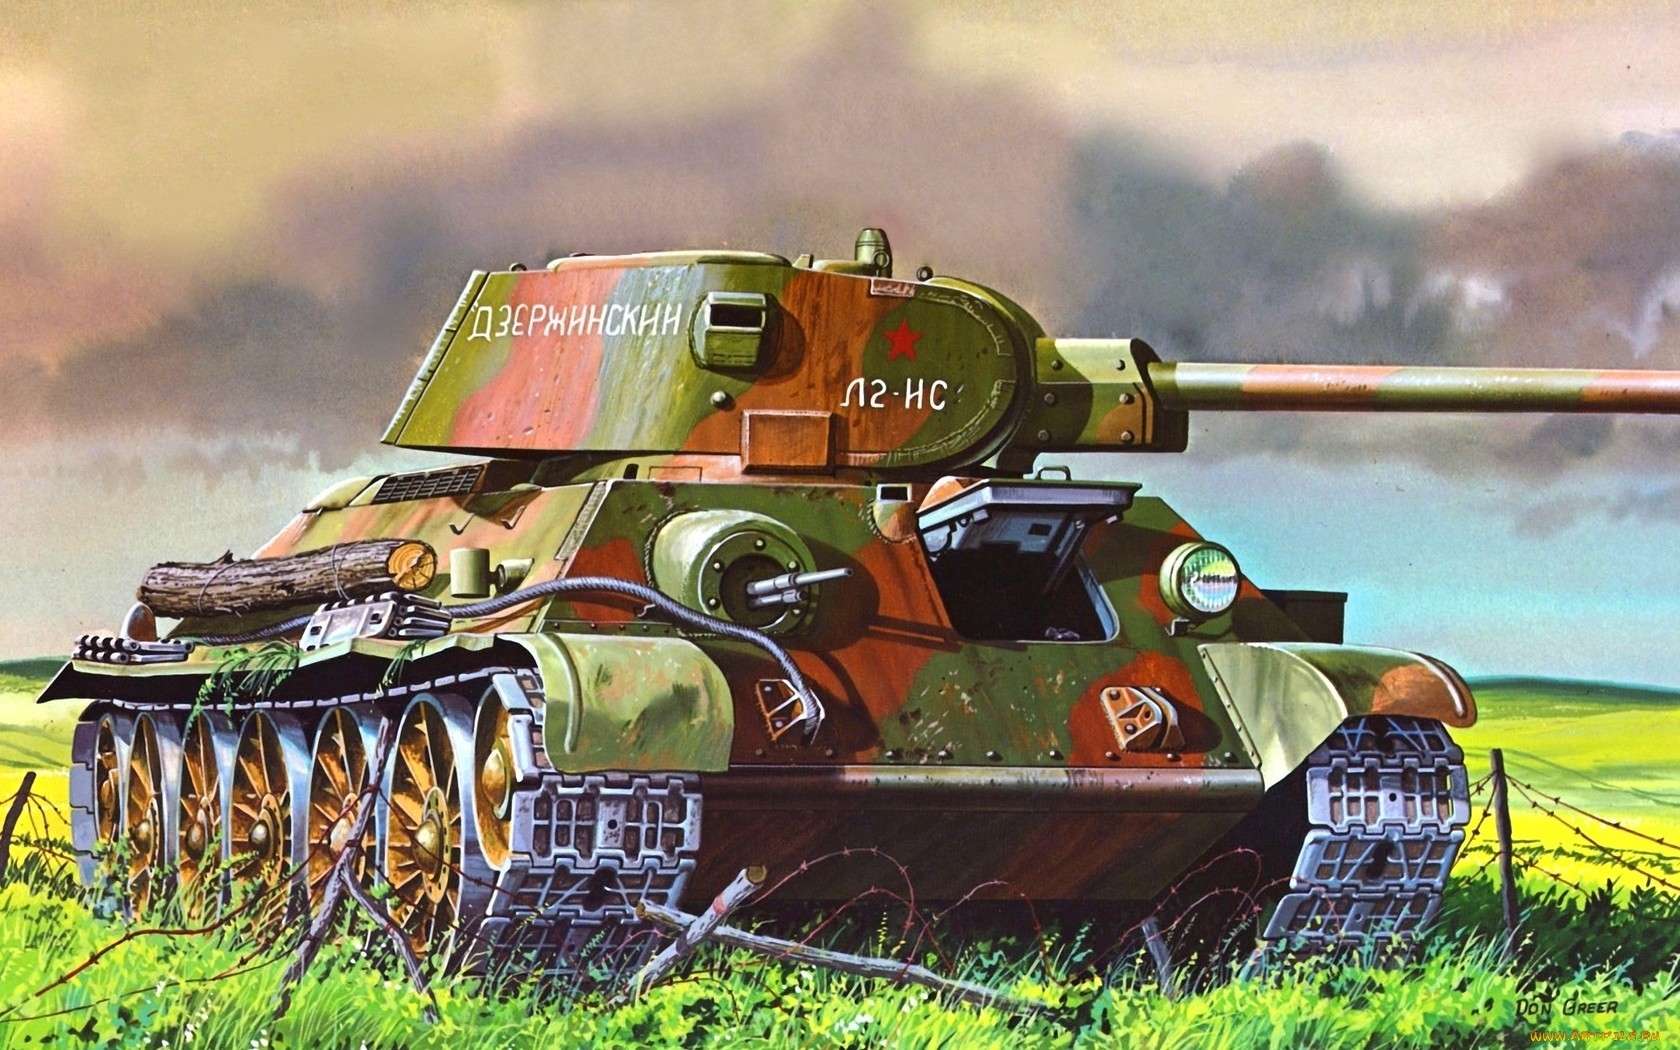 THE 5TH GUARDS TANK CORPS I